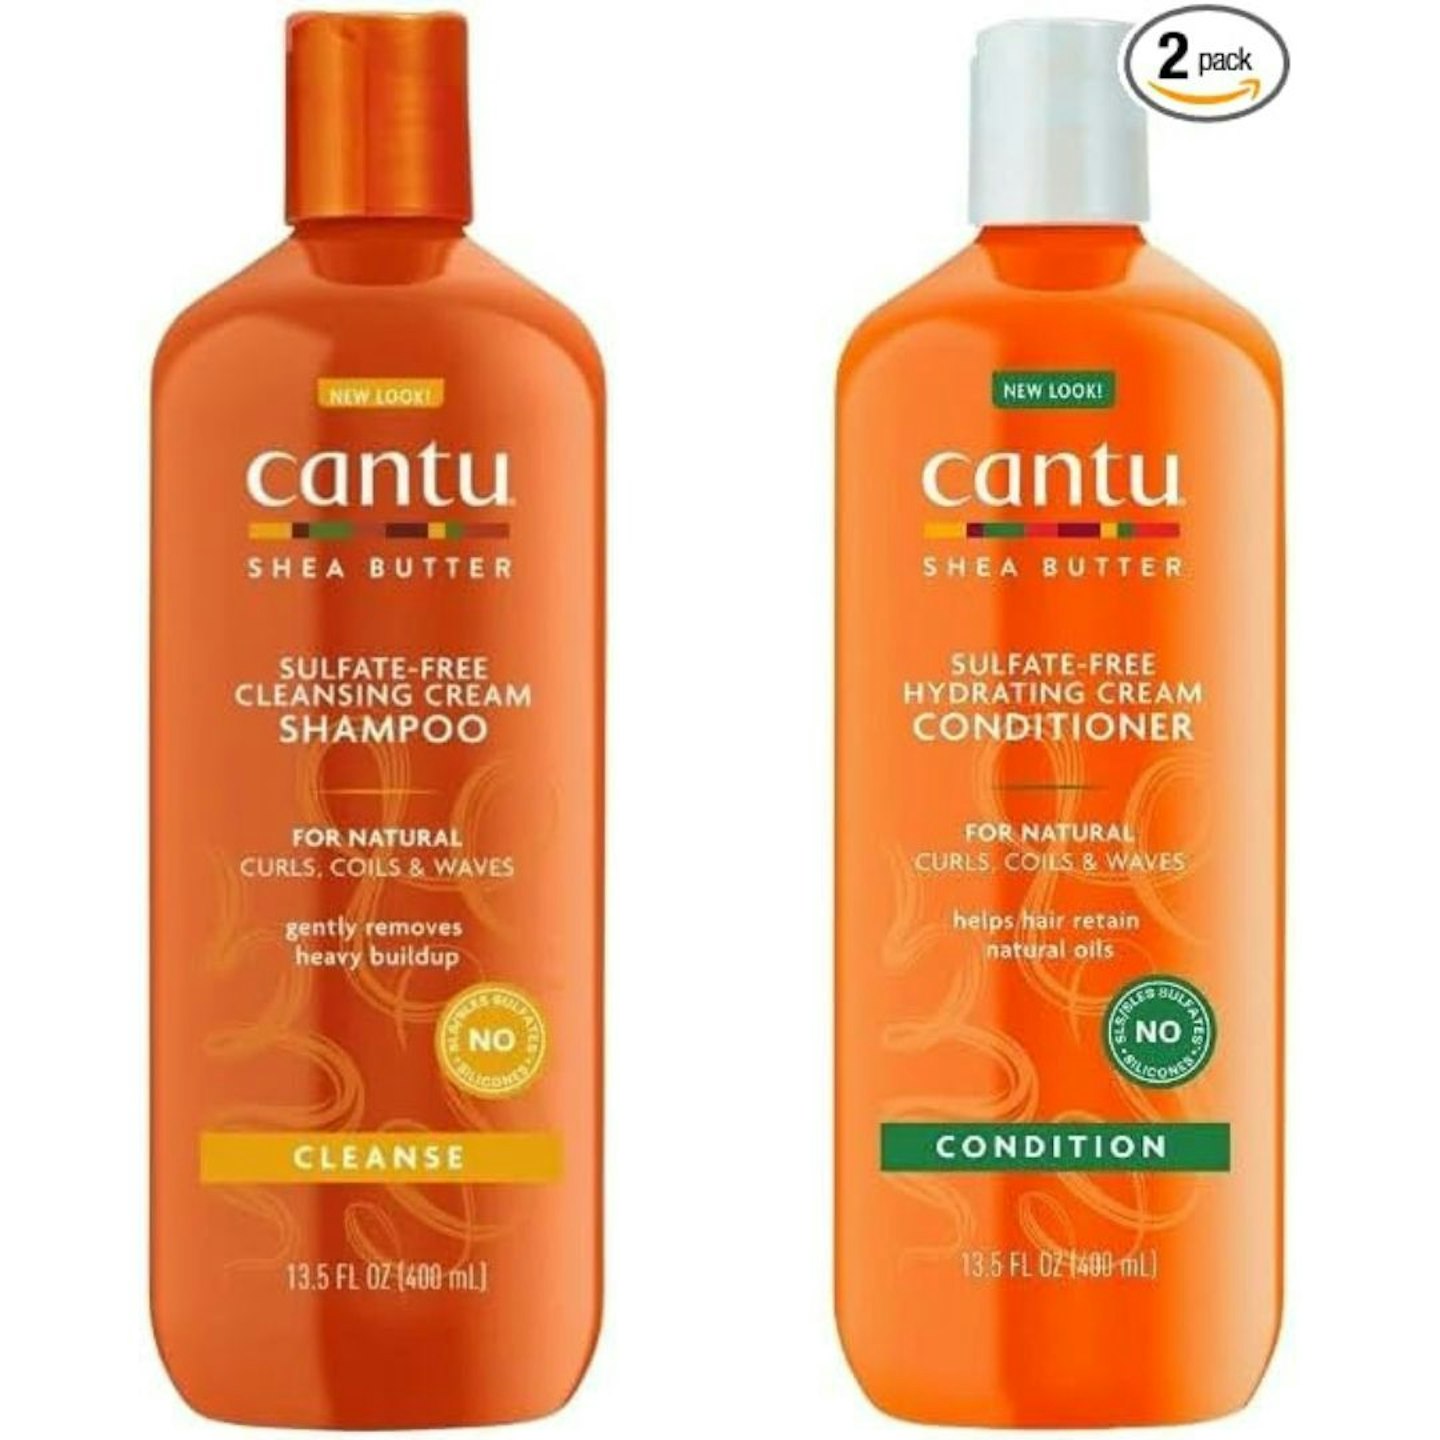 Cantu Shea Butter for Natural Hair Shampoo and Conditioner,